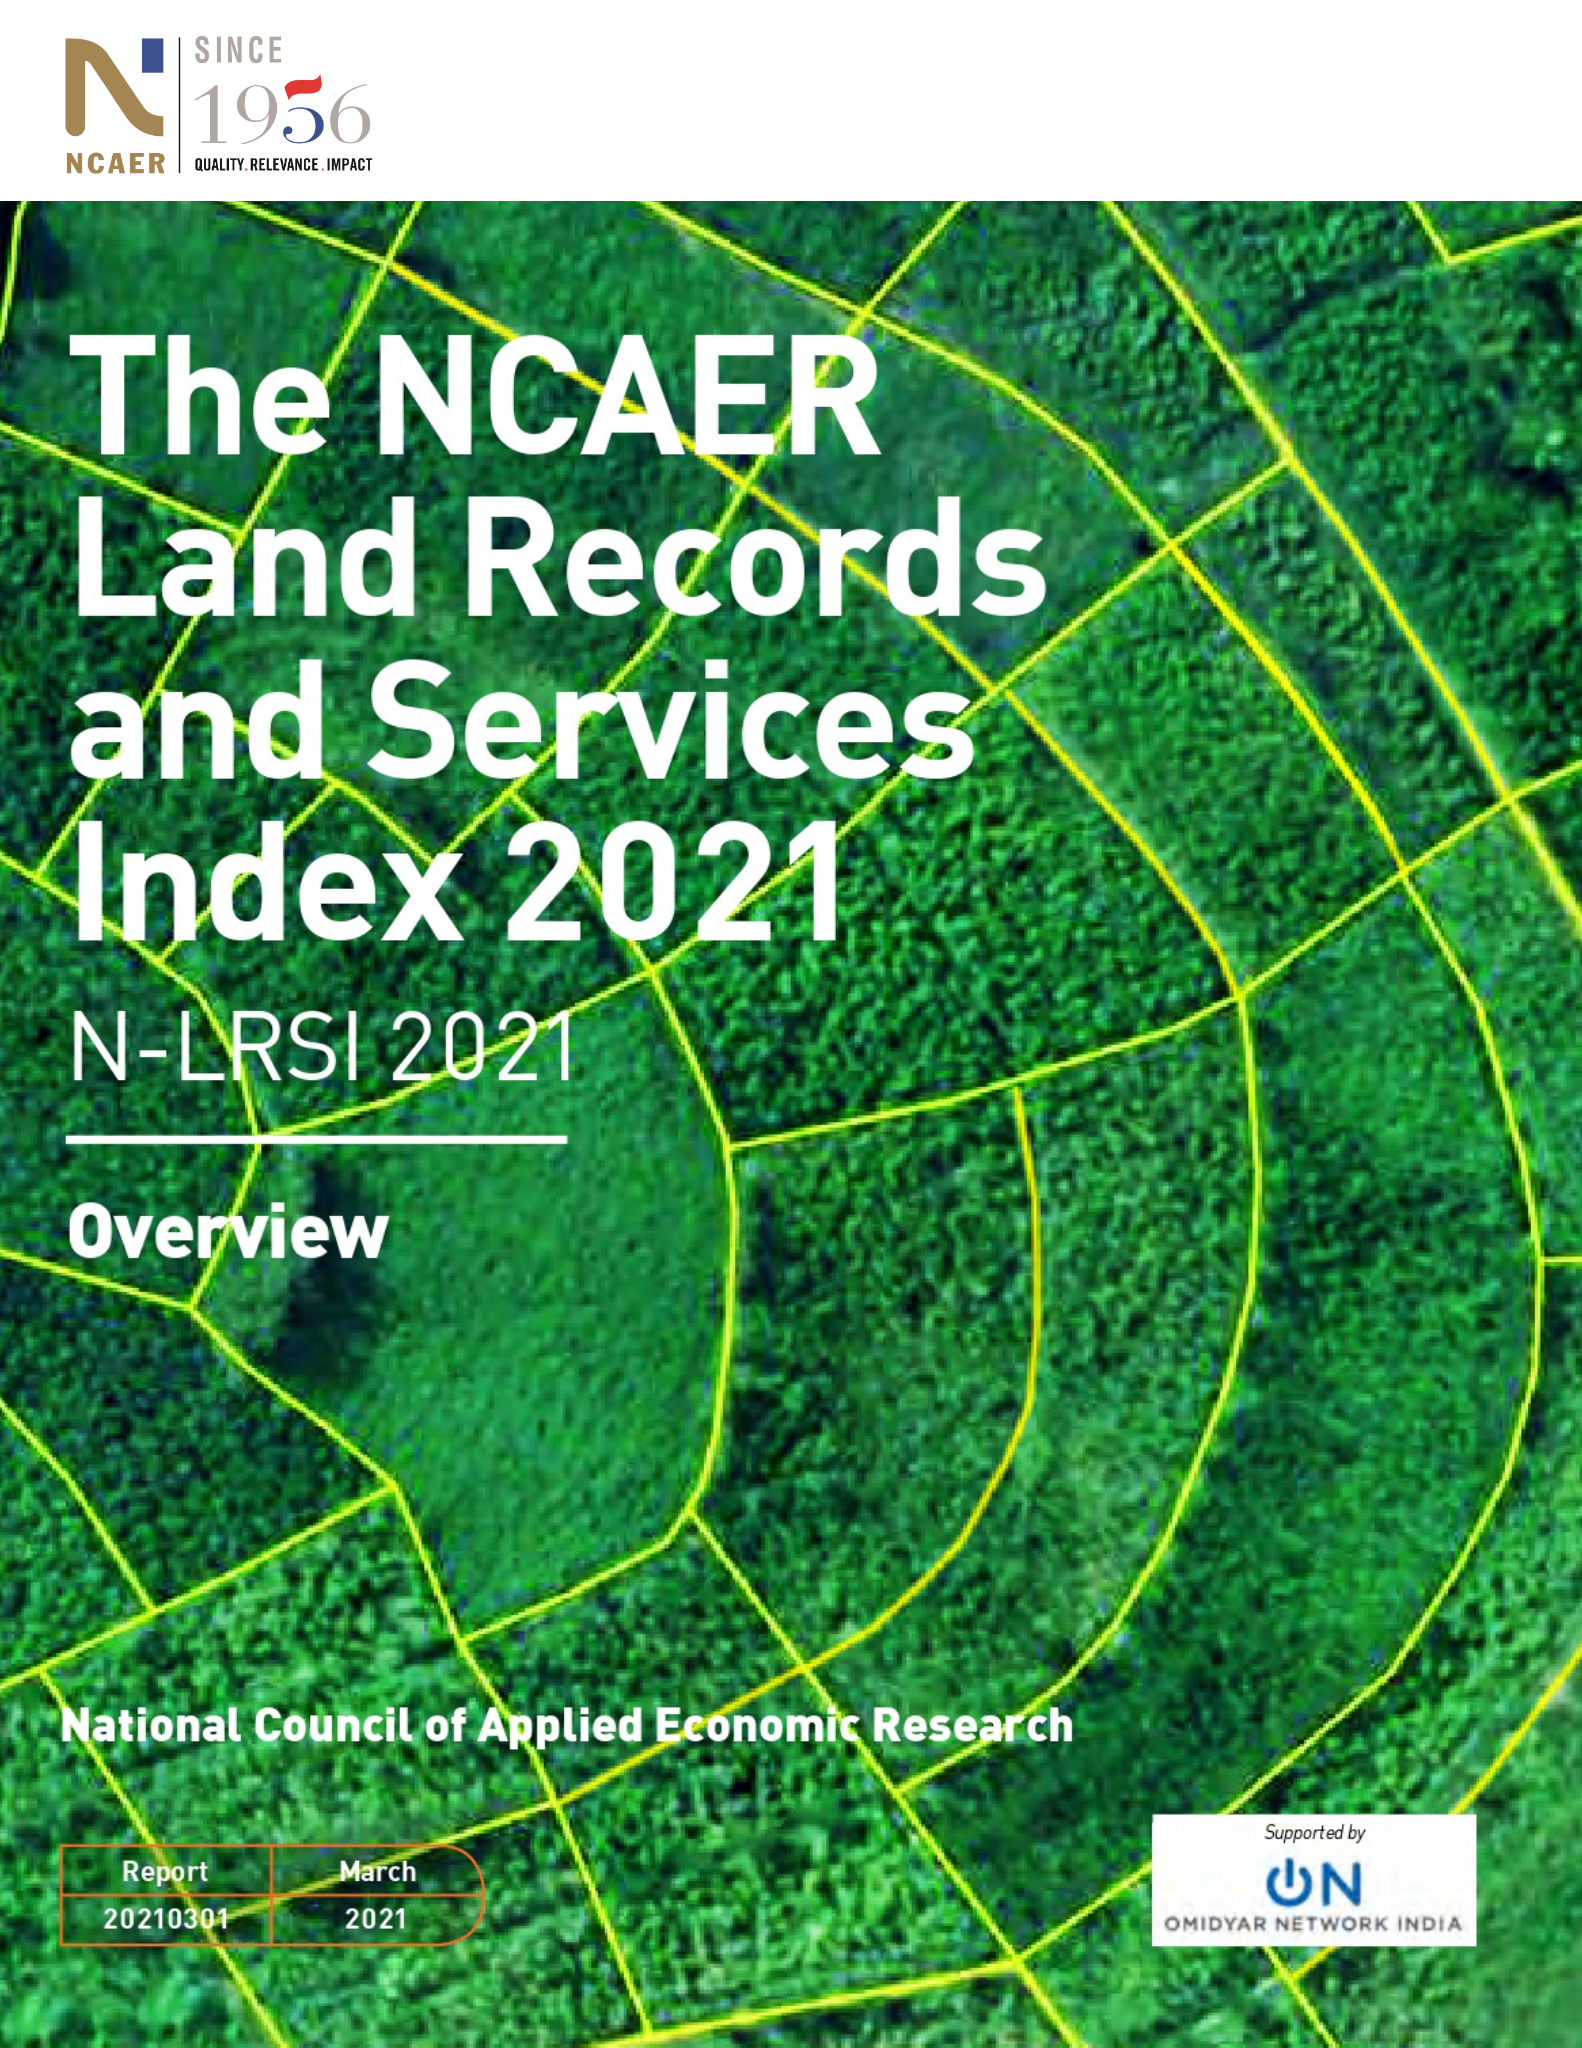 NCAER Land Records and Services Index (N-LRSI) 2021: Overview